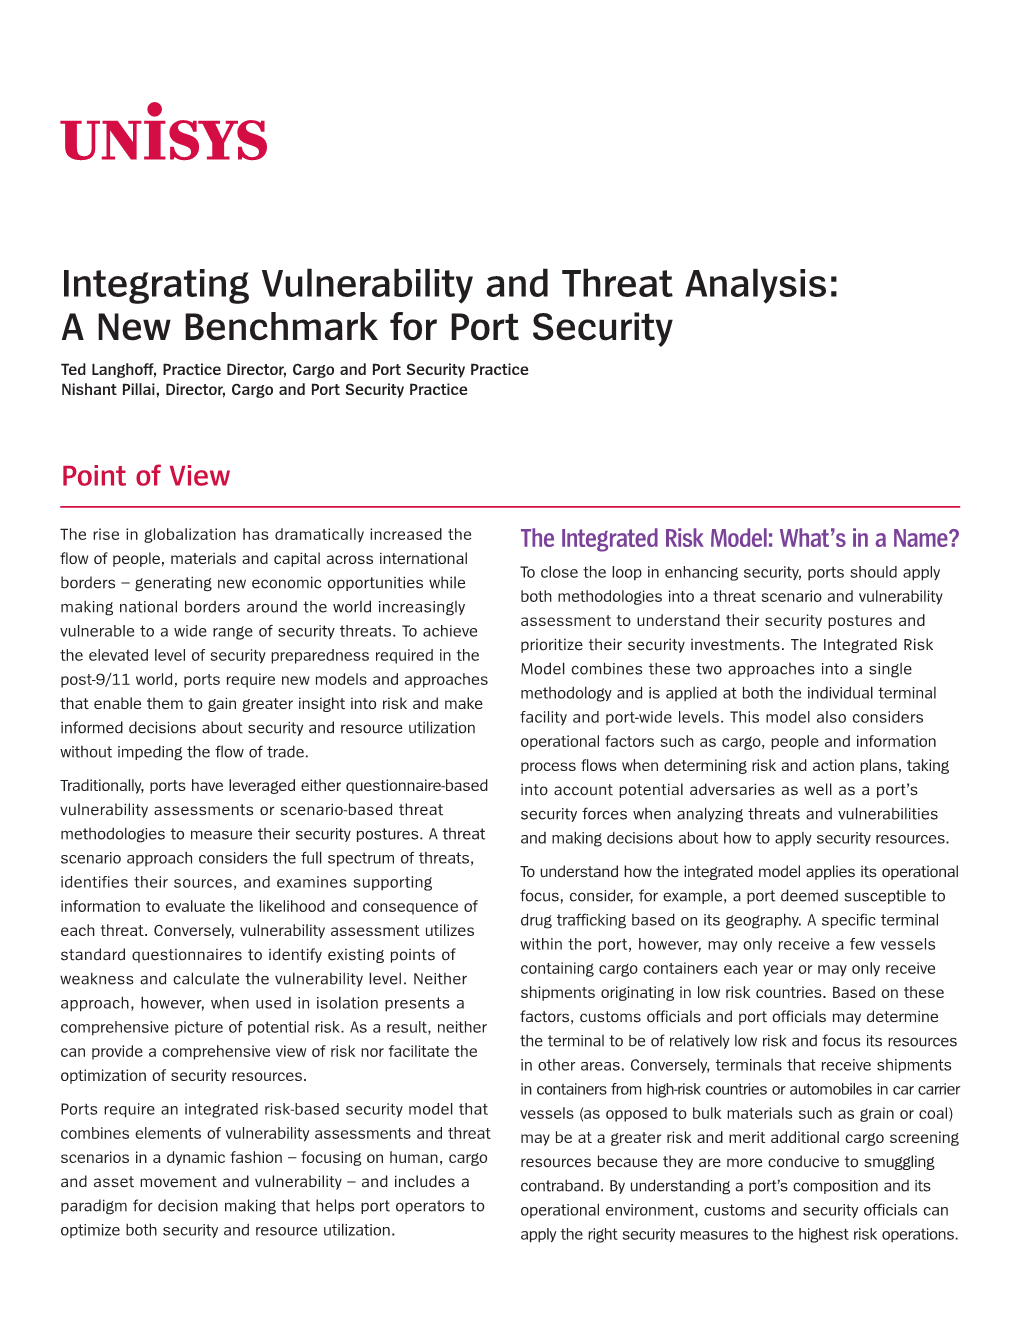 Integrating Vulnerability and Threat Analysis: a New Benchmark for Port